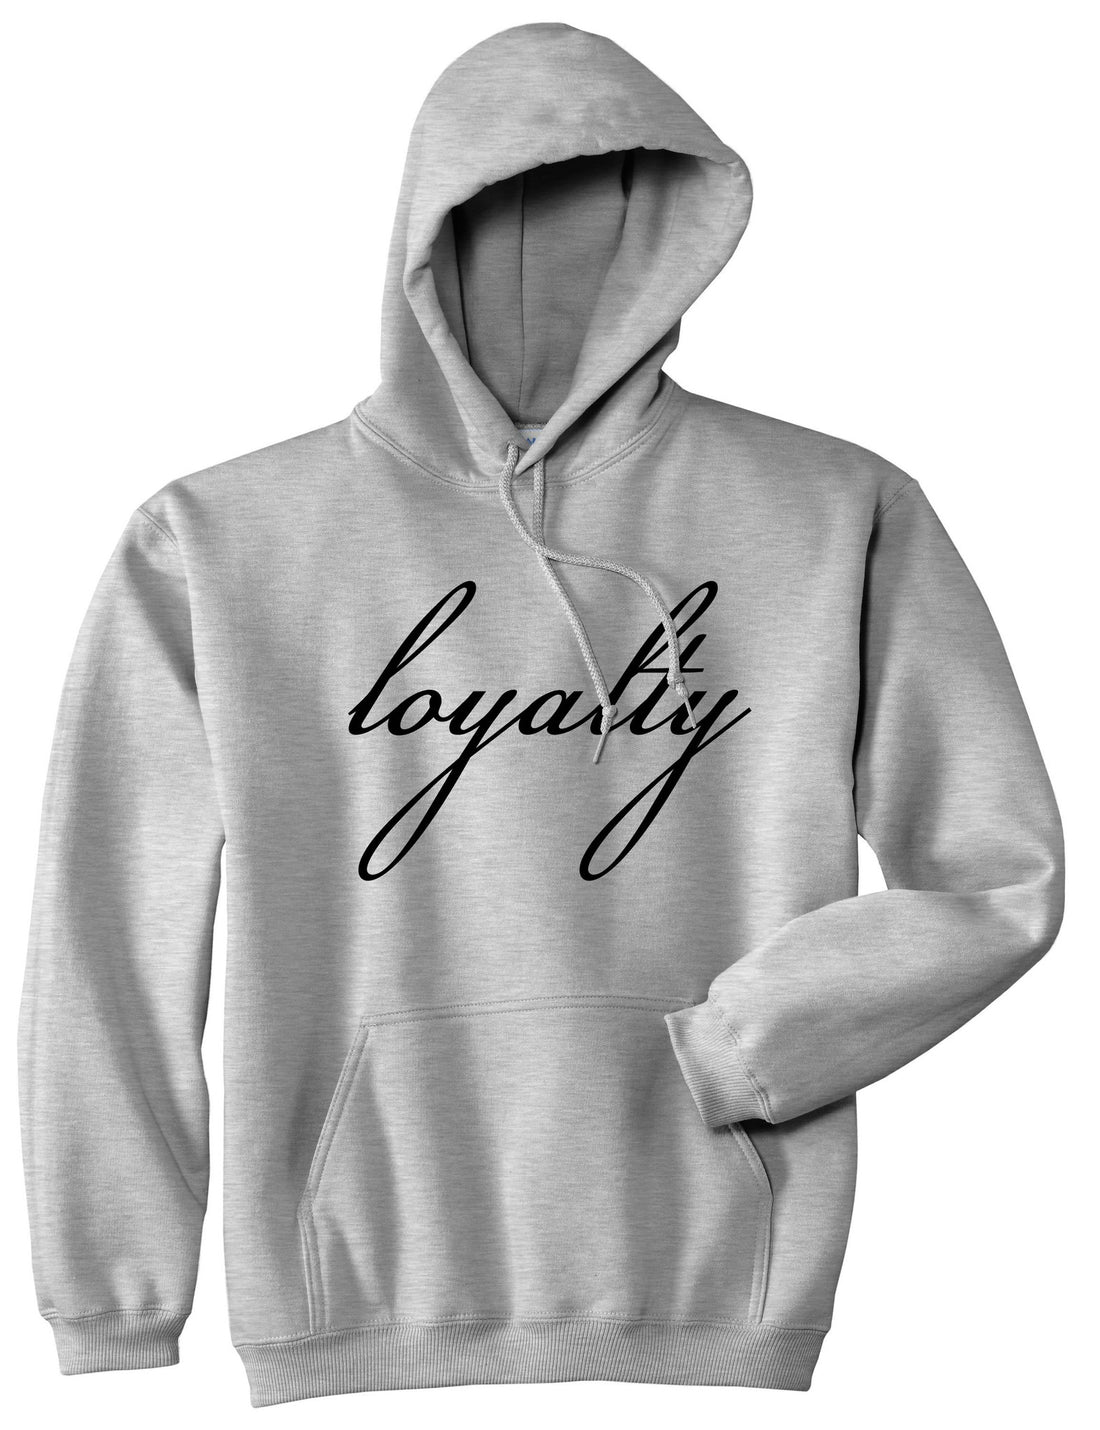 Loyalty Respect Aint New York Hoes Pullover Hoodie Hoody In Grey by Kings Of NY